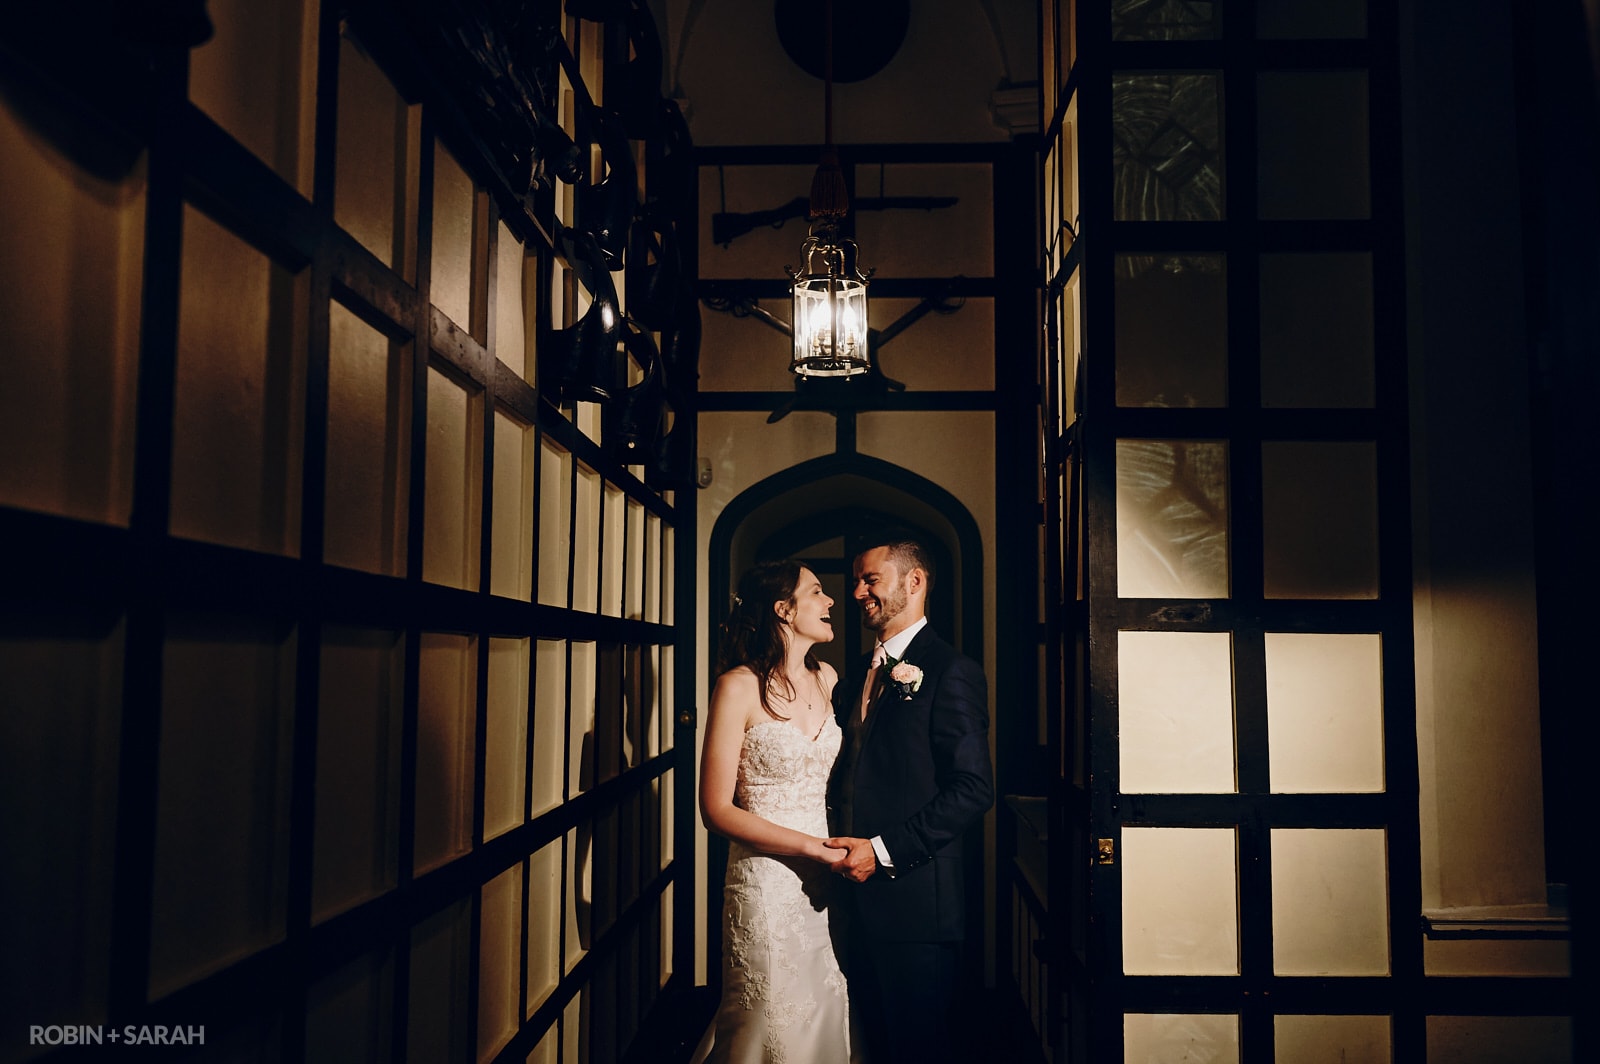 Bride and groom relax together in beautiful hallway at Warwick Castle